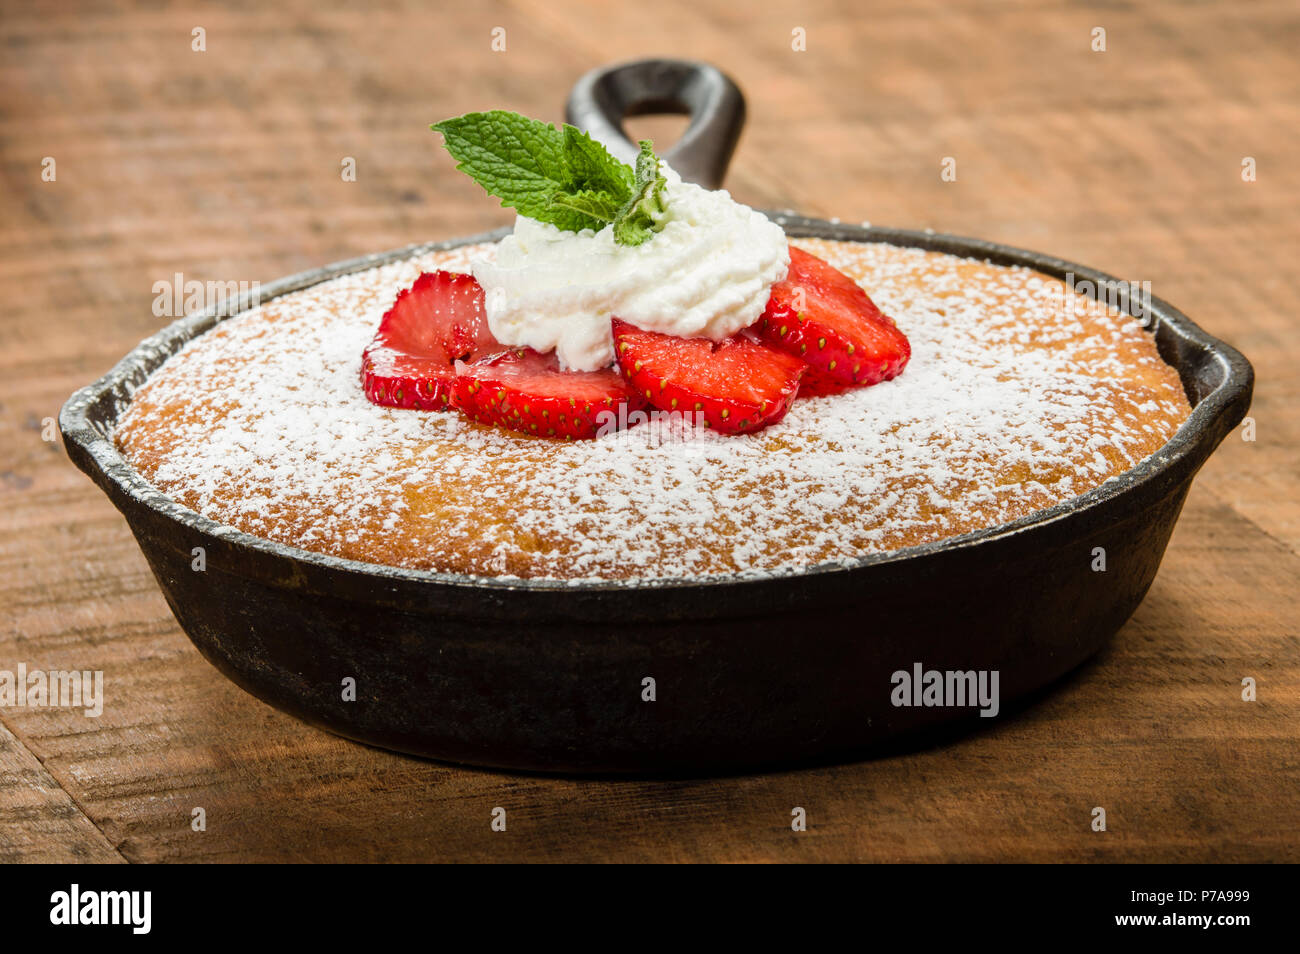 Skillet baked yellow cake with cream and red strawberries Stock Photo